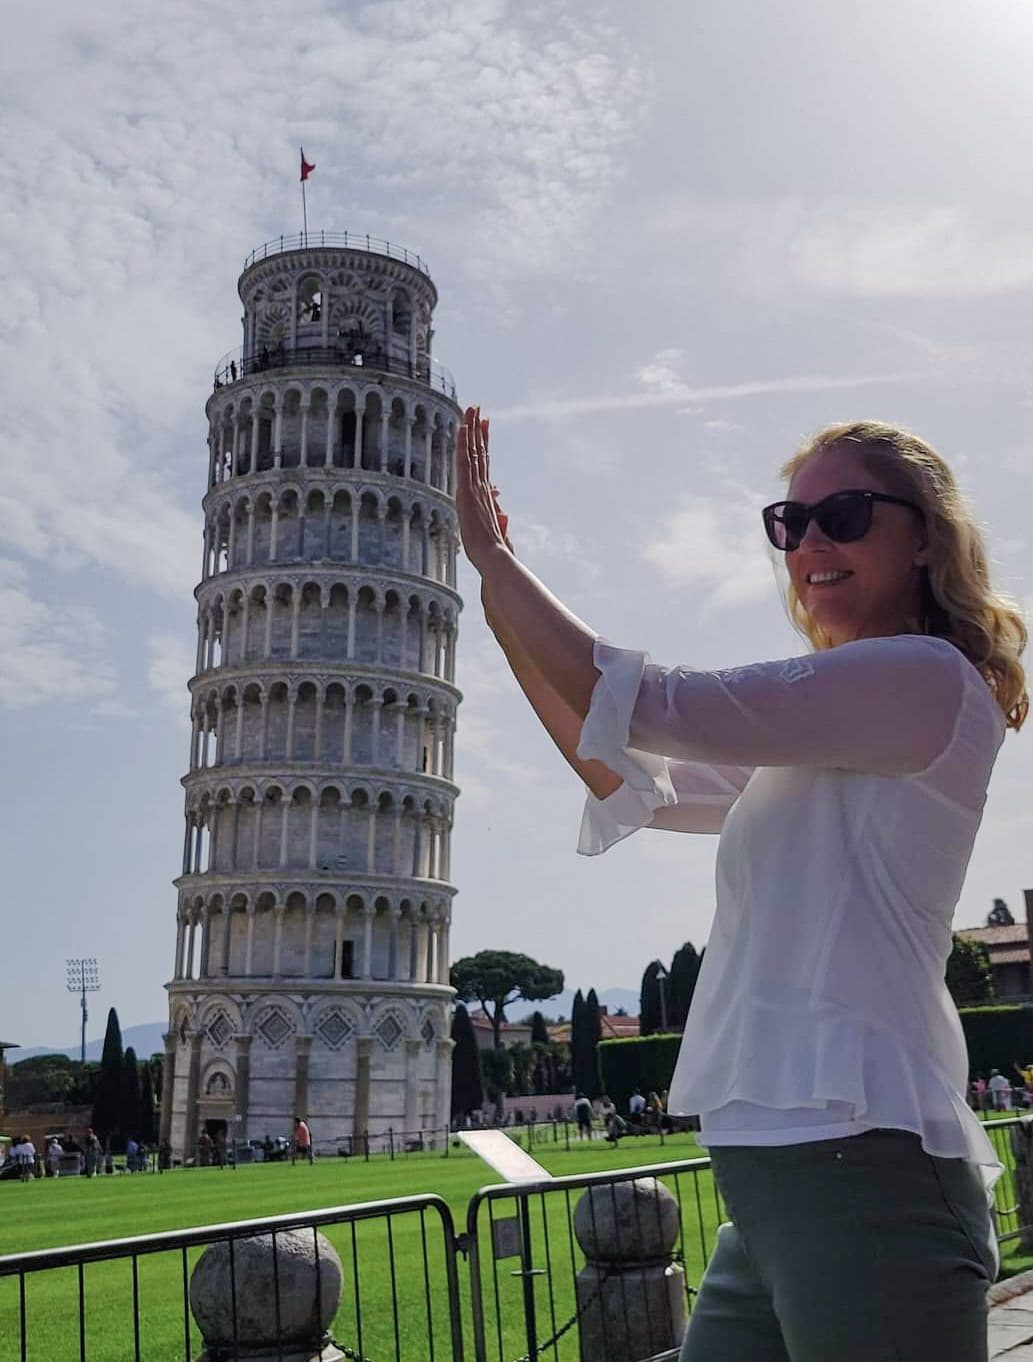 the Leaning Tower of Pisa poses